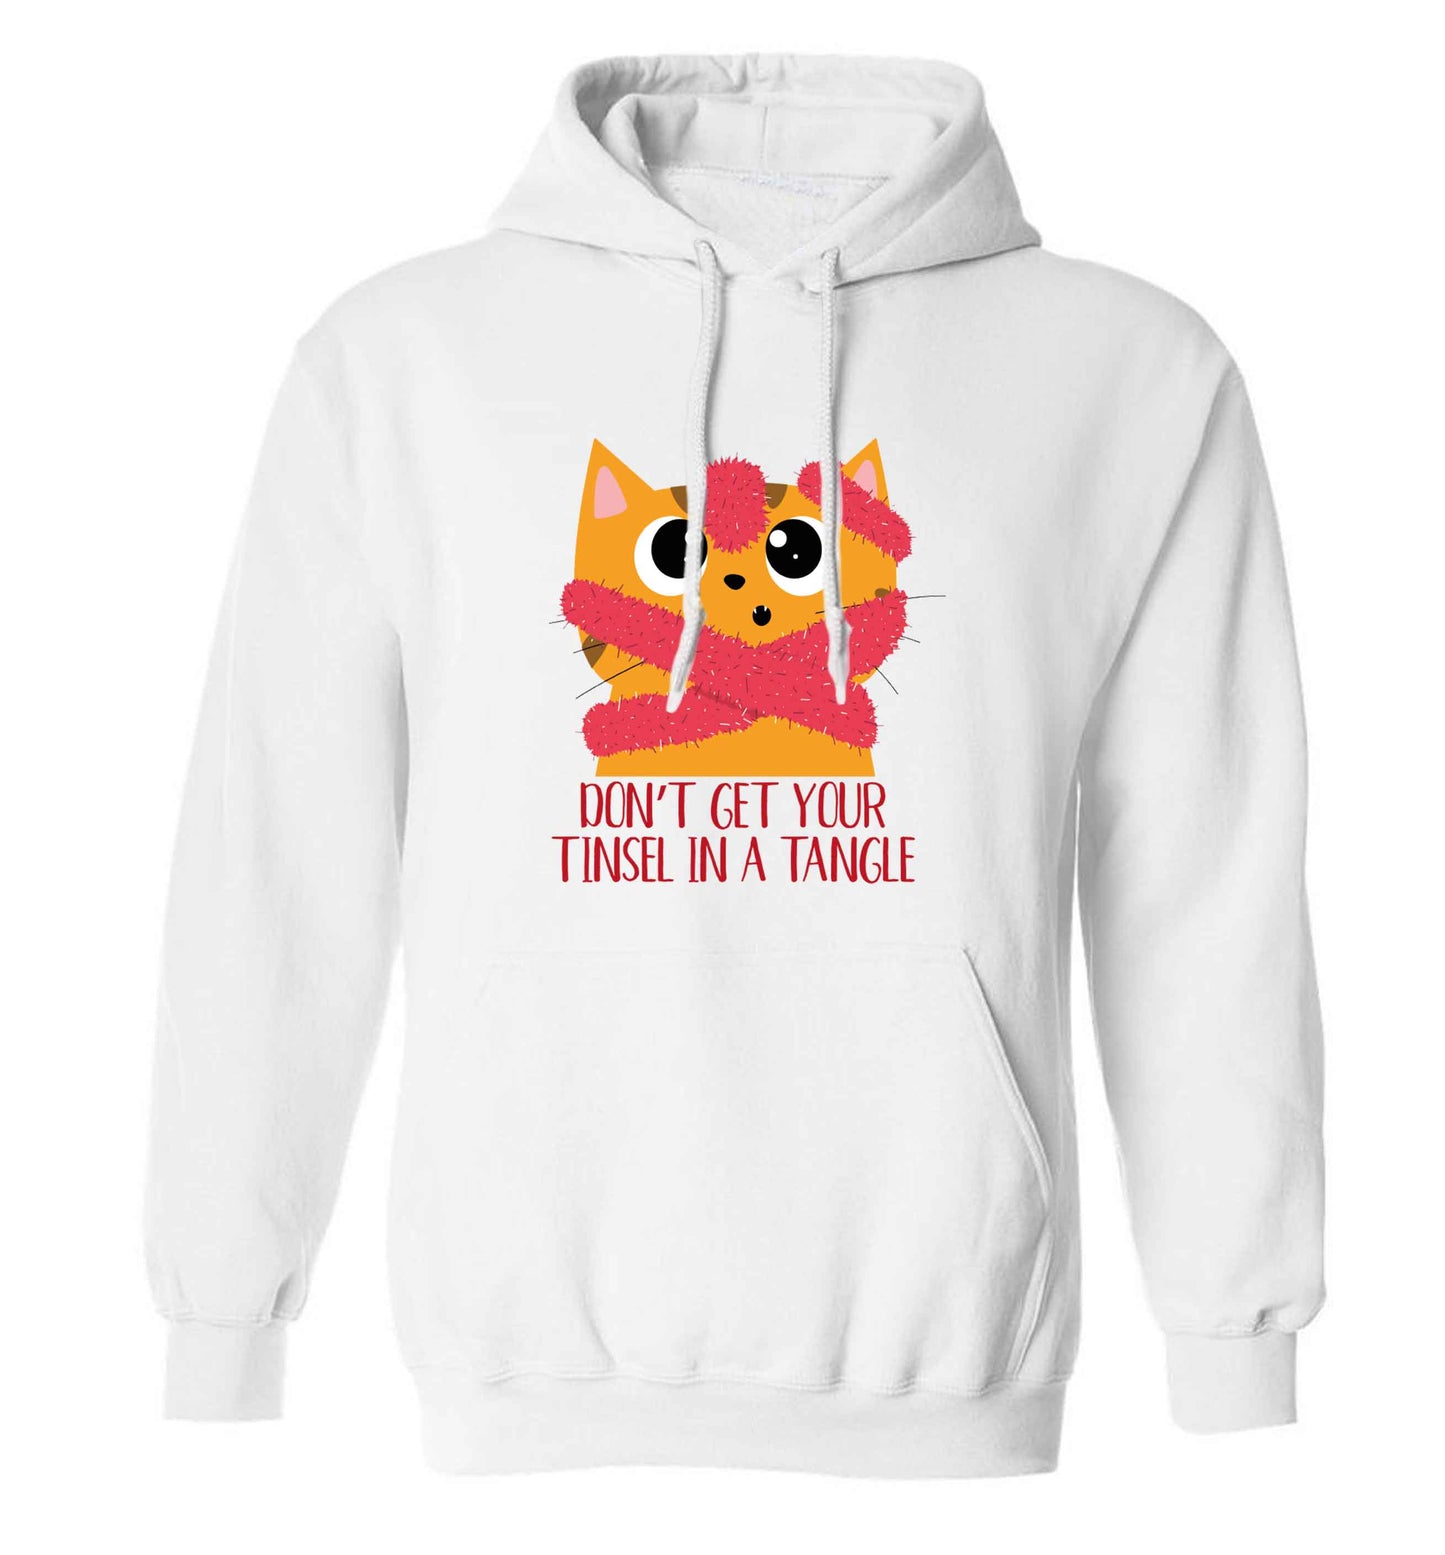 Don't get your tinsel in a tangle adults unisex white hoodie 2XL